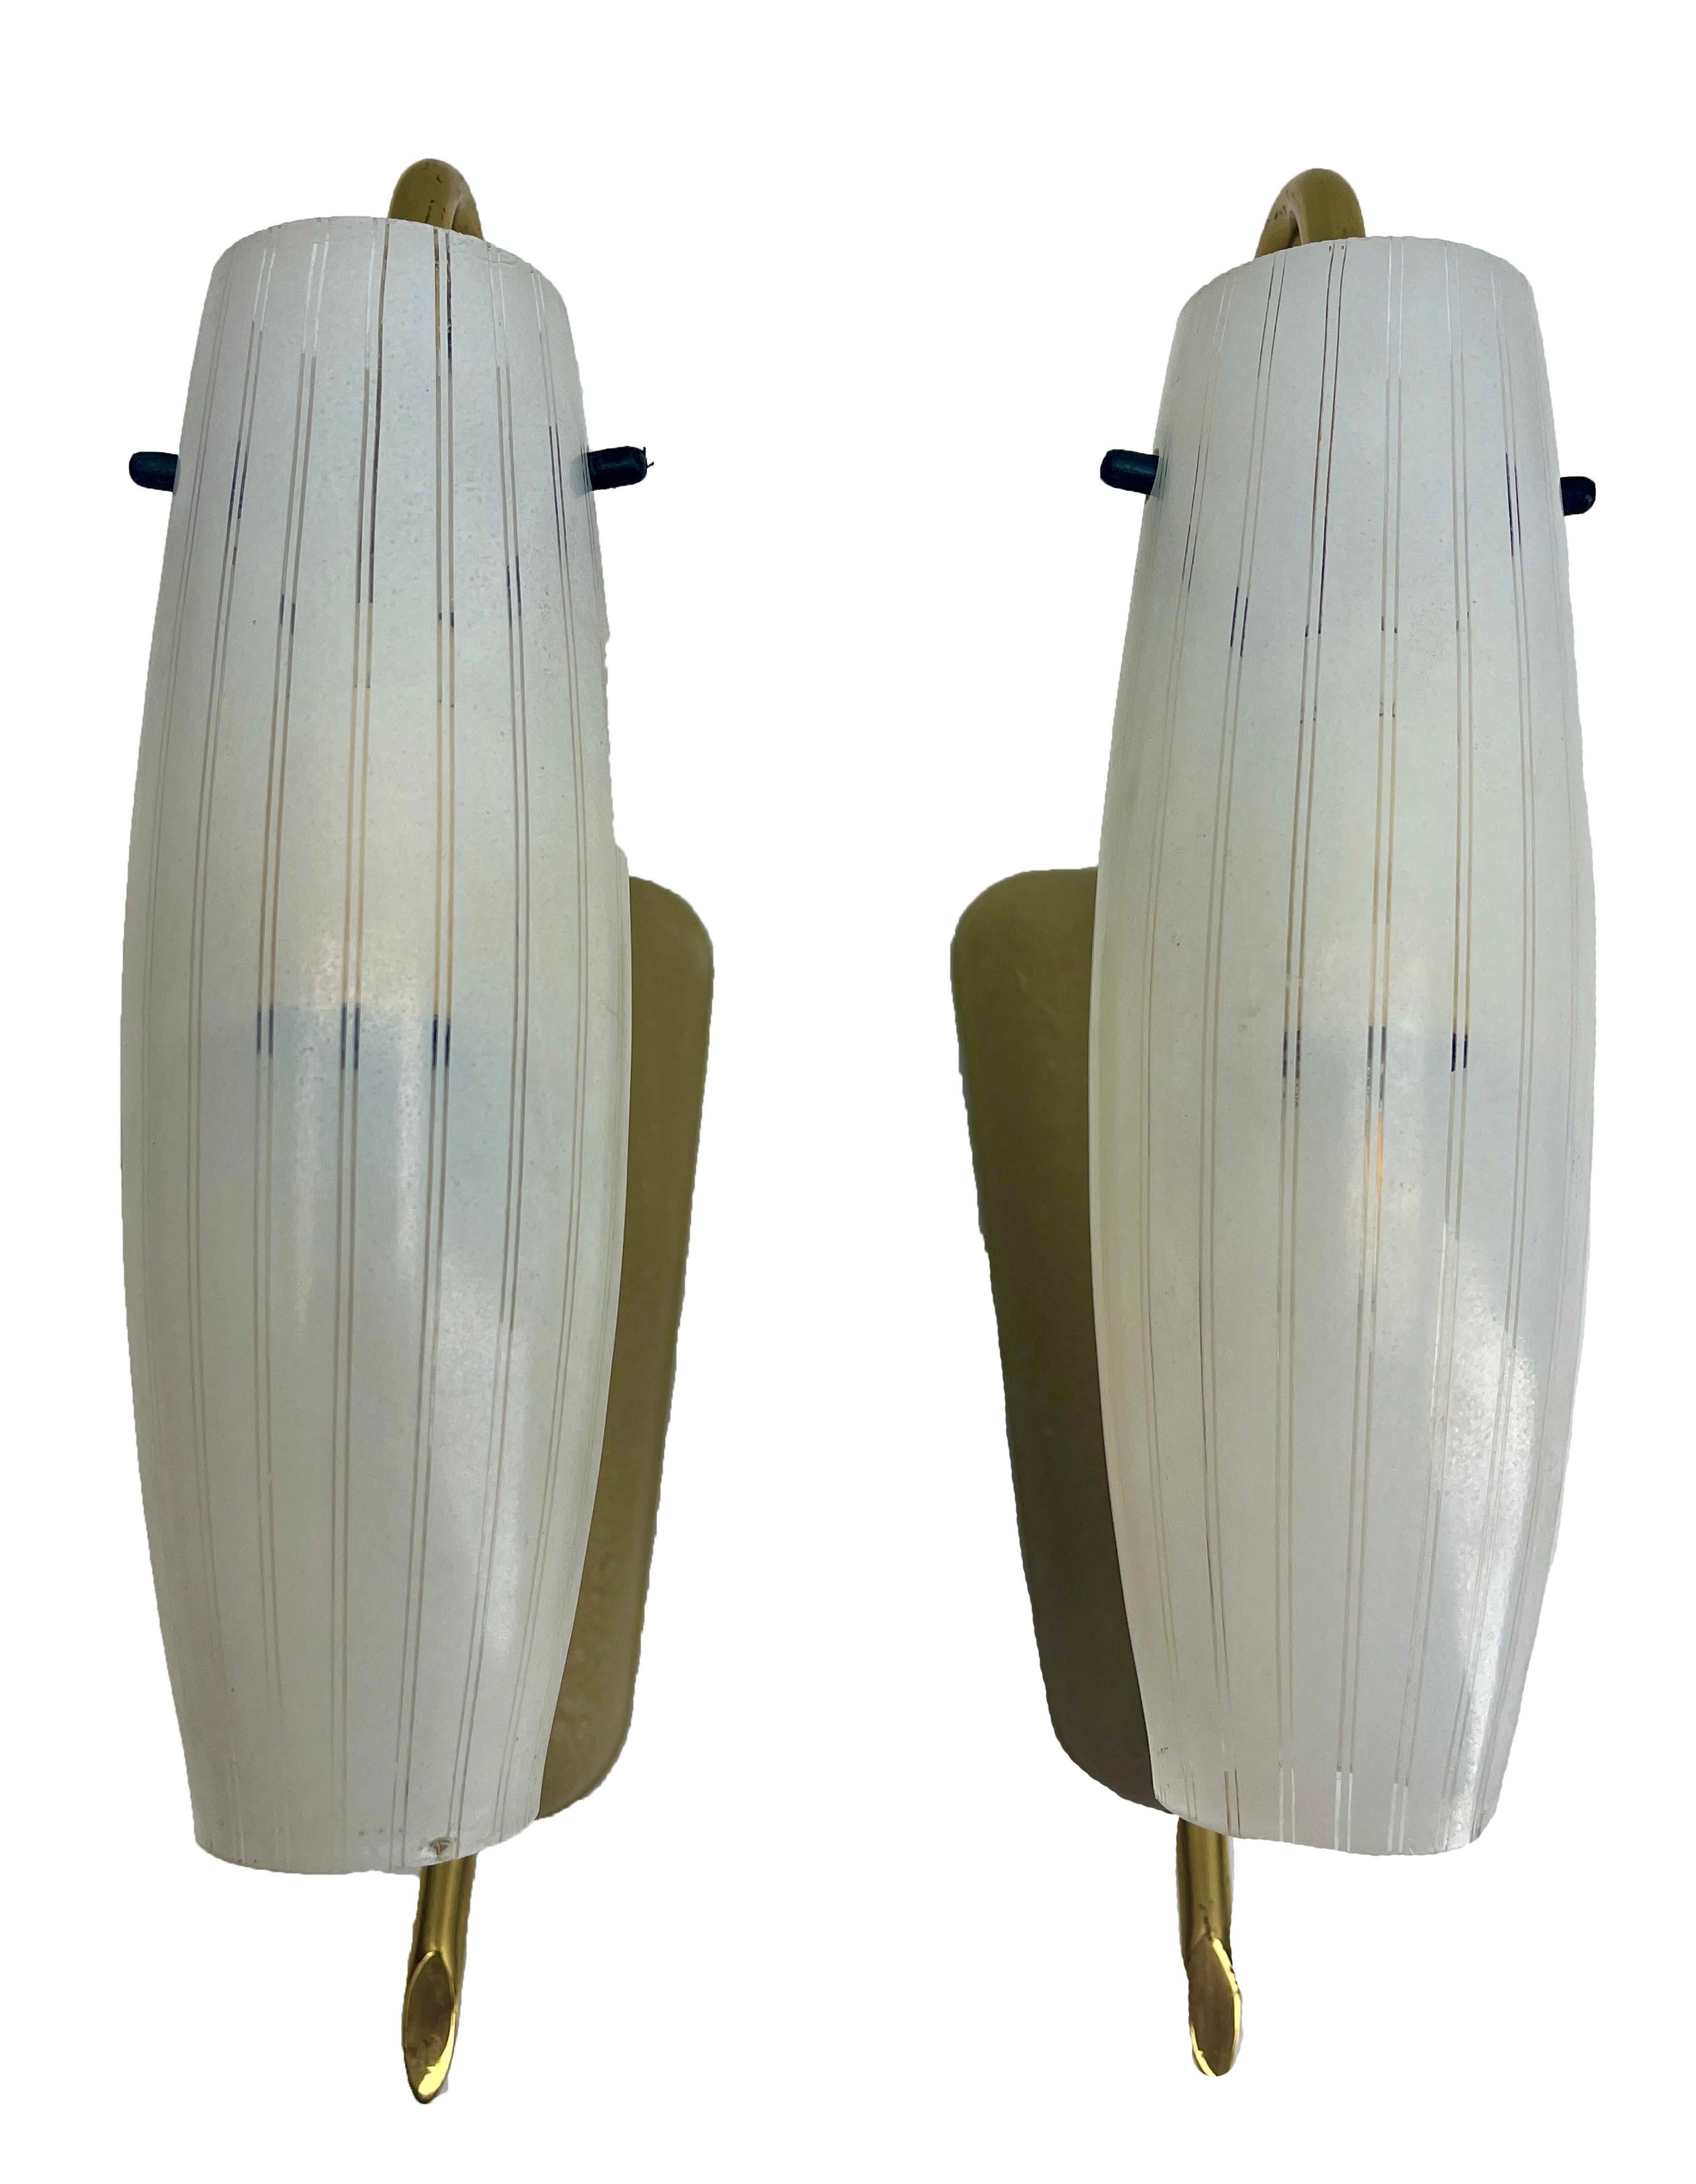 Vintage Pair of 1 Arm Wall Mount Lamps in the Style of Stilnovo, Italian, 1960s For Sale 6